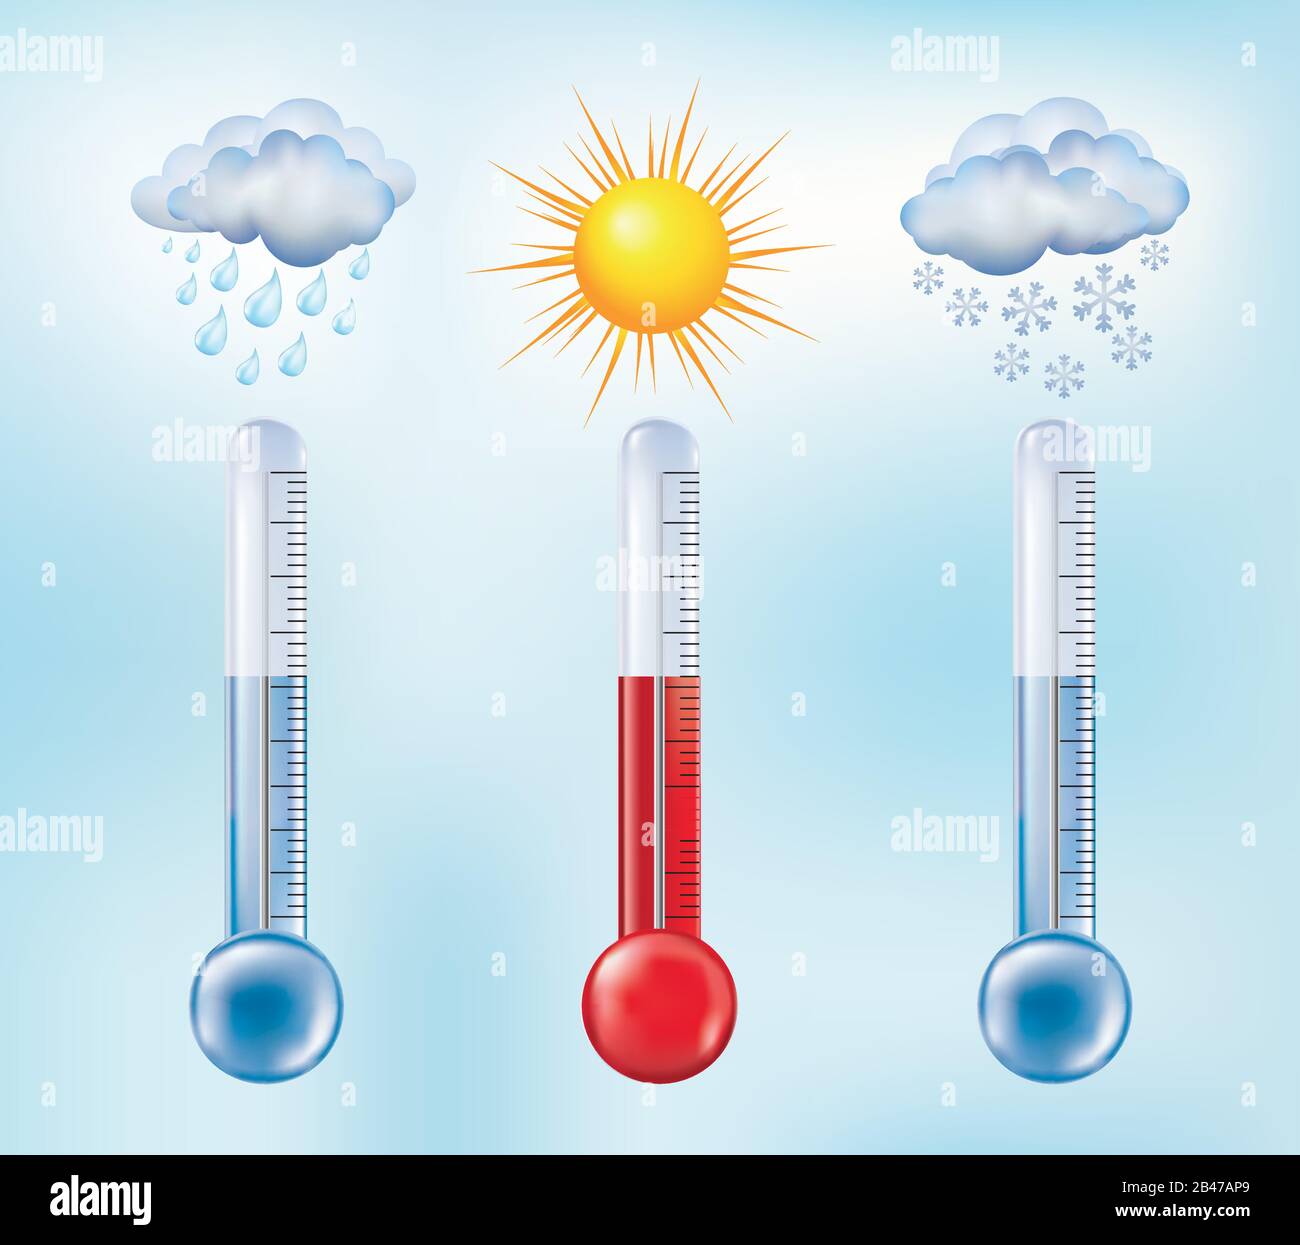 https://c8.alamy.com/comp/2B47AP9/temperature-measurement-thermometer-with-sun-symbols-clouds-with-rain-snow-sky-background-weather-forecast-vector-3d-illustration-2B47AP9.jpg